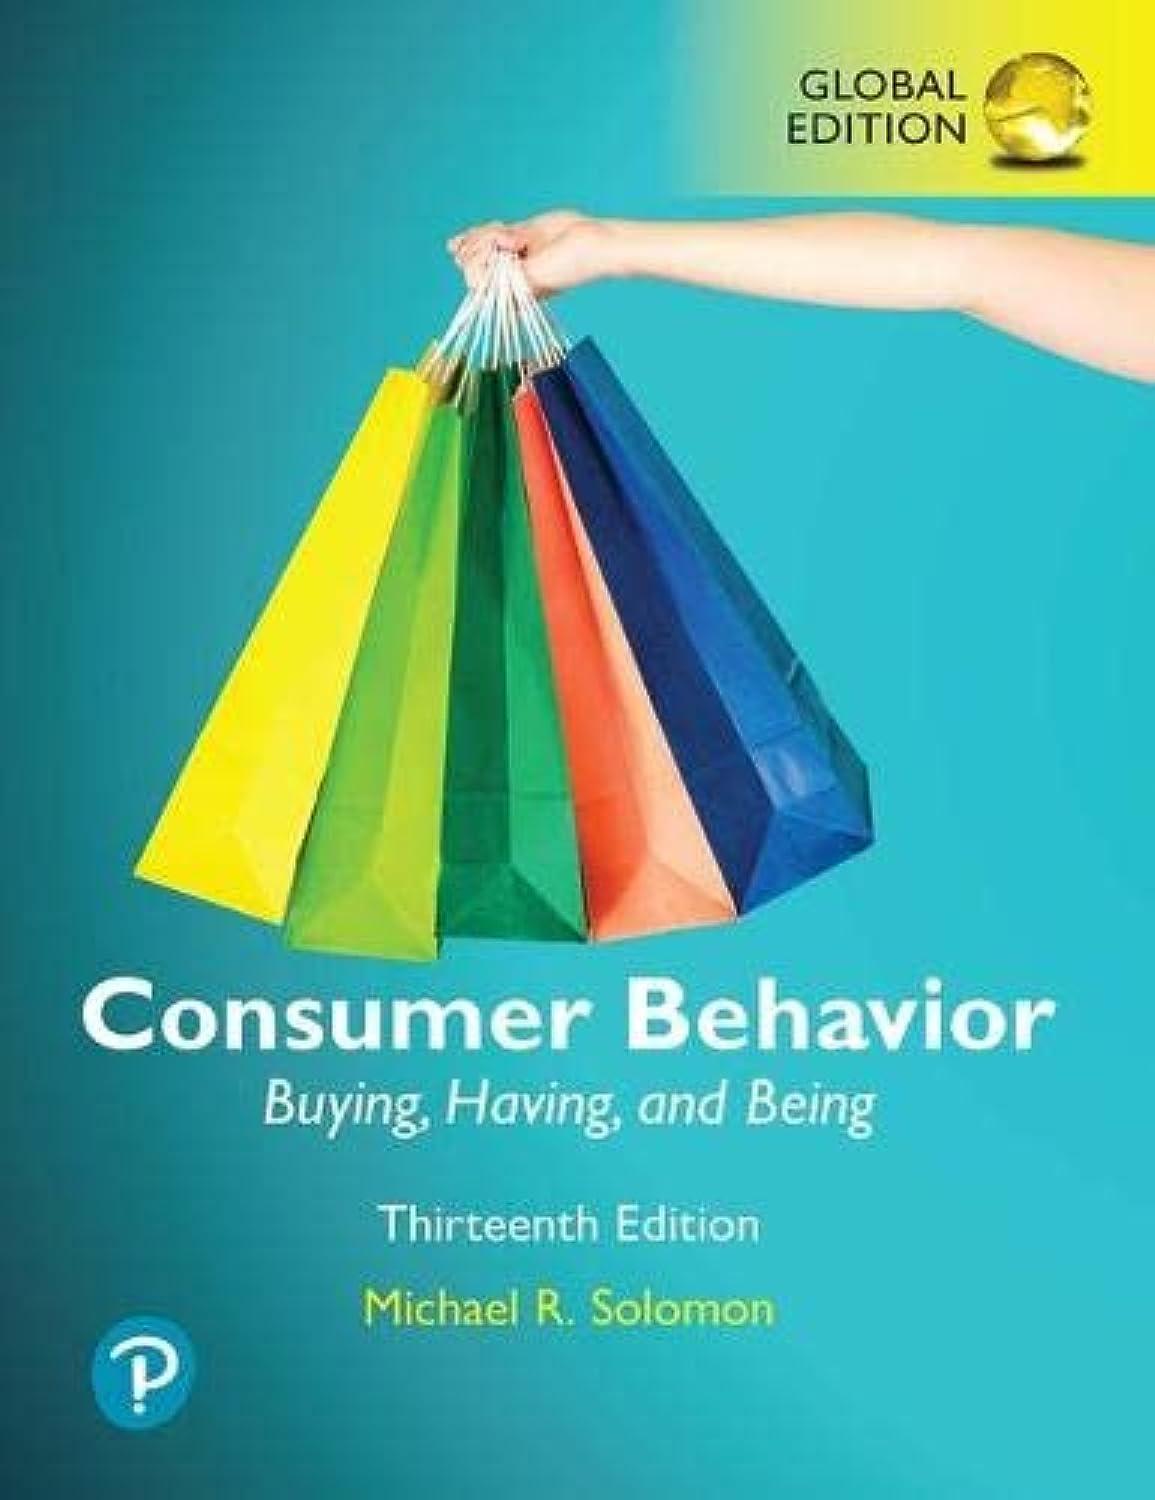 consumer behavior buying having and being 13th global edition michael r. solomon 1292318104, 978-1292318103